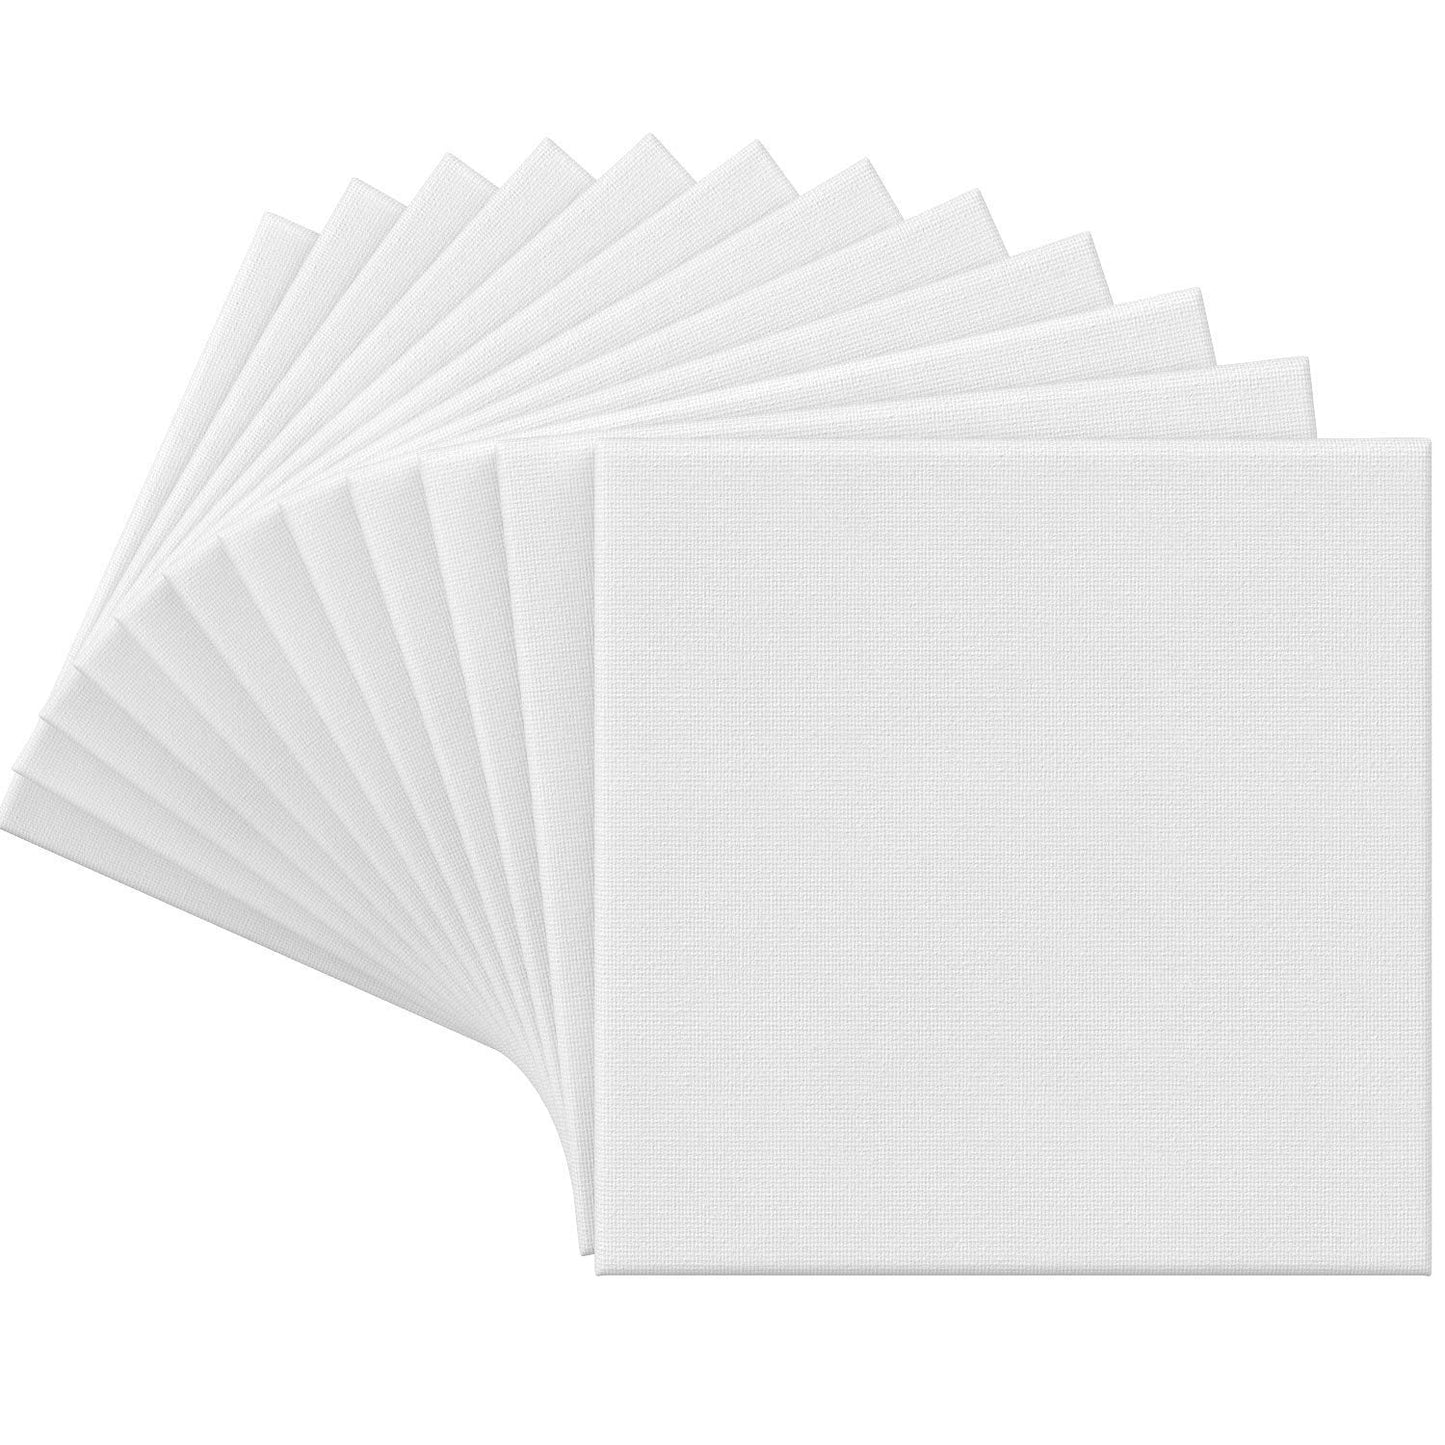 Arteza Classic Stretched Canvas, 8" x 8" - Pack of 12